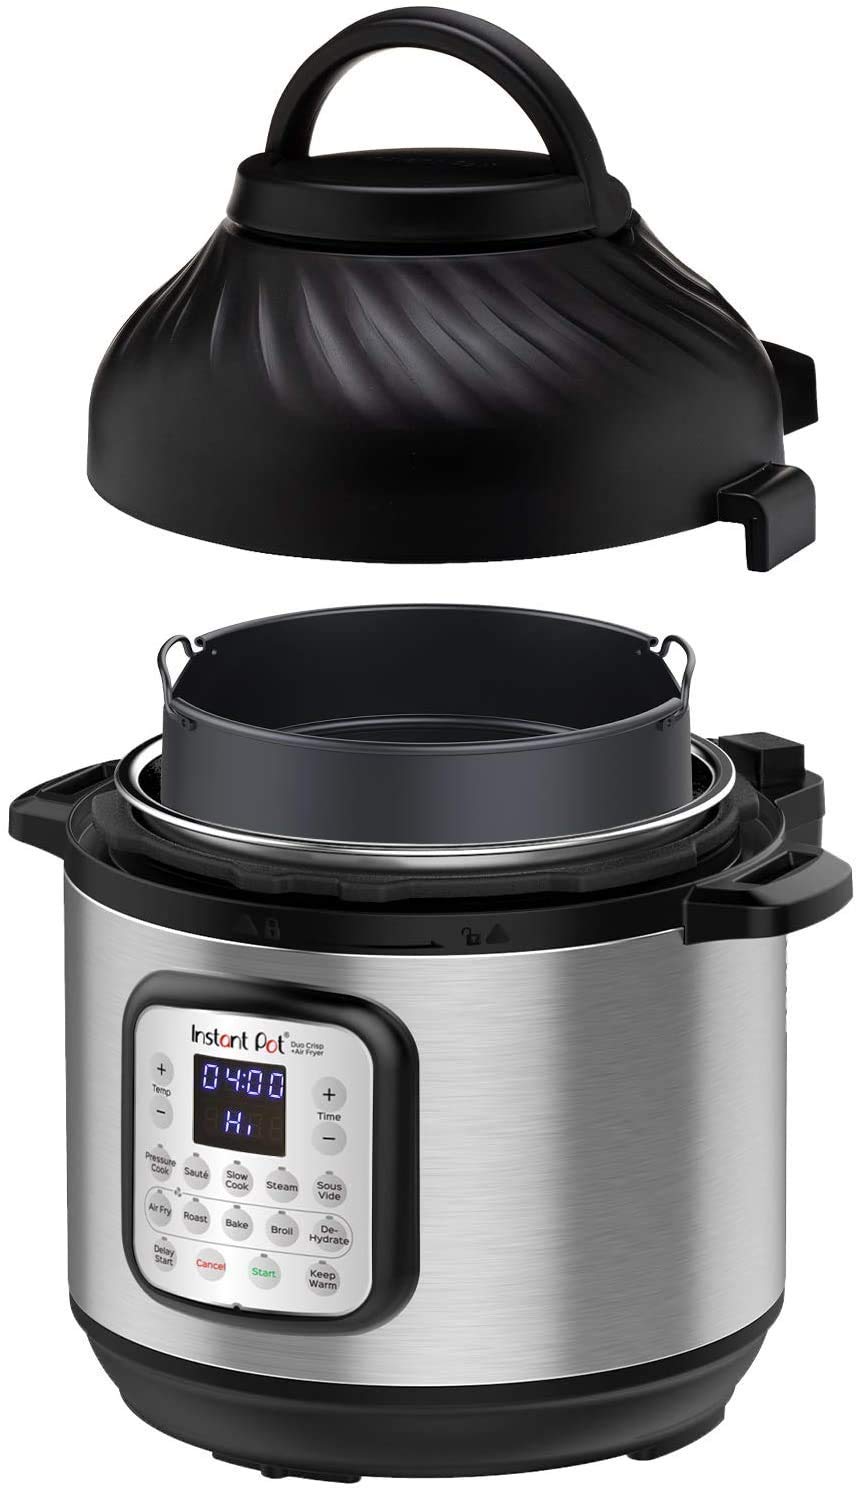  Instant Pot Duo Crisp 11-in-1 Air Fryer and Electric Pressure Cooker Combo with Multicooker Lids that Air Fries, Steams, Slow Cooks, Sautés, Dehydrates, & More, Free App With Over 800 Recipes, 6 Quart...